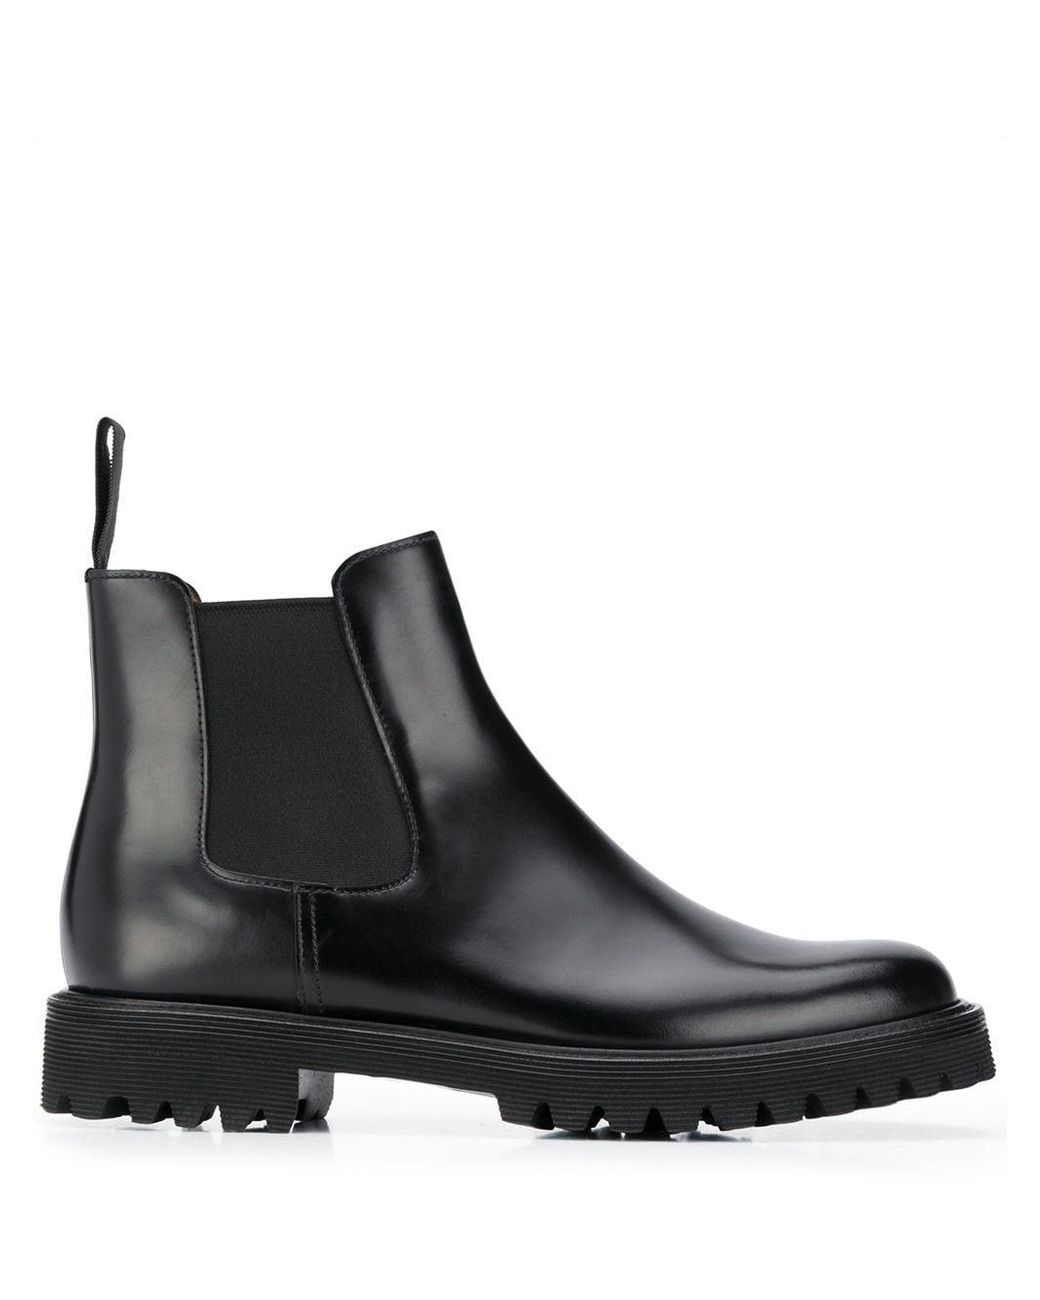 Church's Leather Charlize Chelsea Boots in Black - Lyst